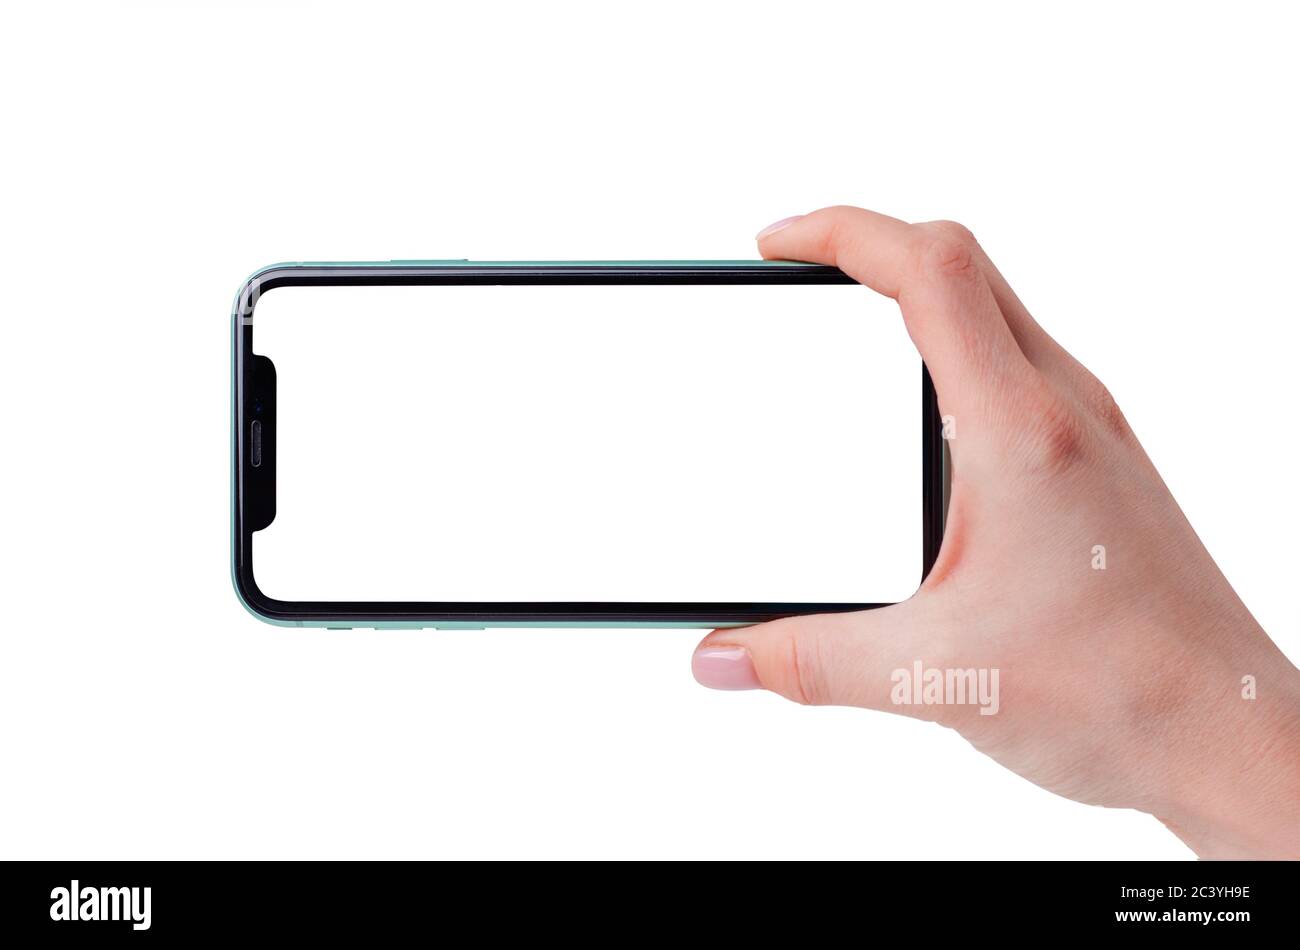 Moscow, Russia - March 14, 2020: Green Apple iPhone 11 gorizontal mock up in a female hand isolated on a white background. Close-up of a new smartphon Stock Photo